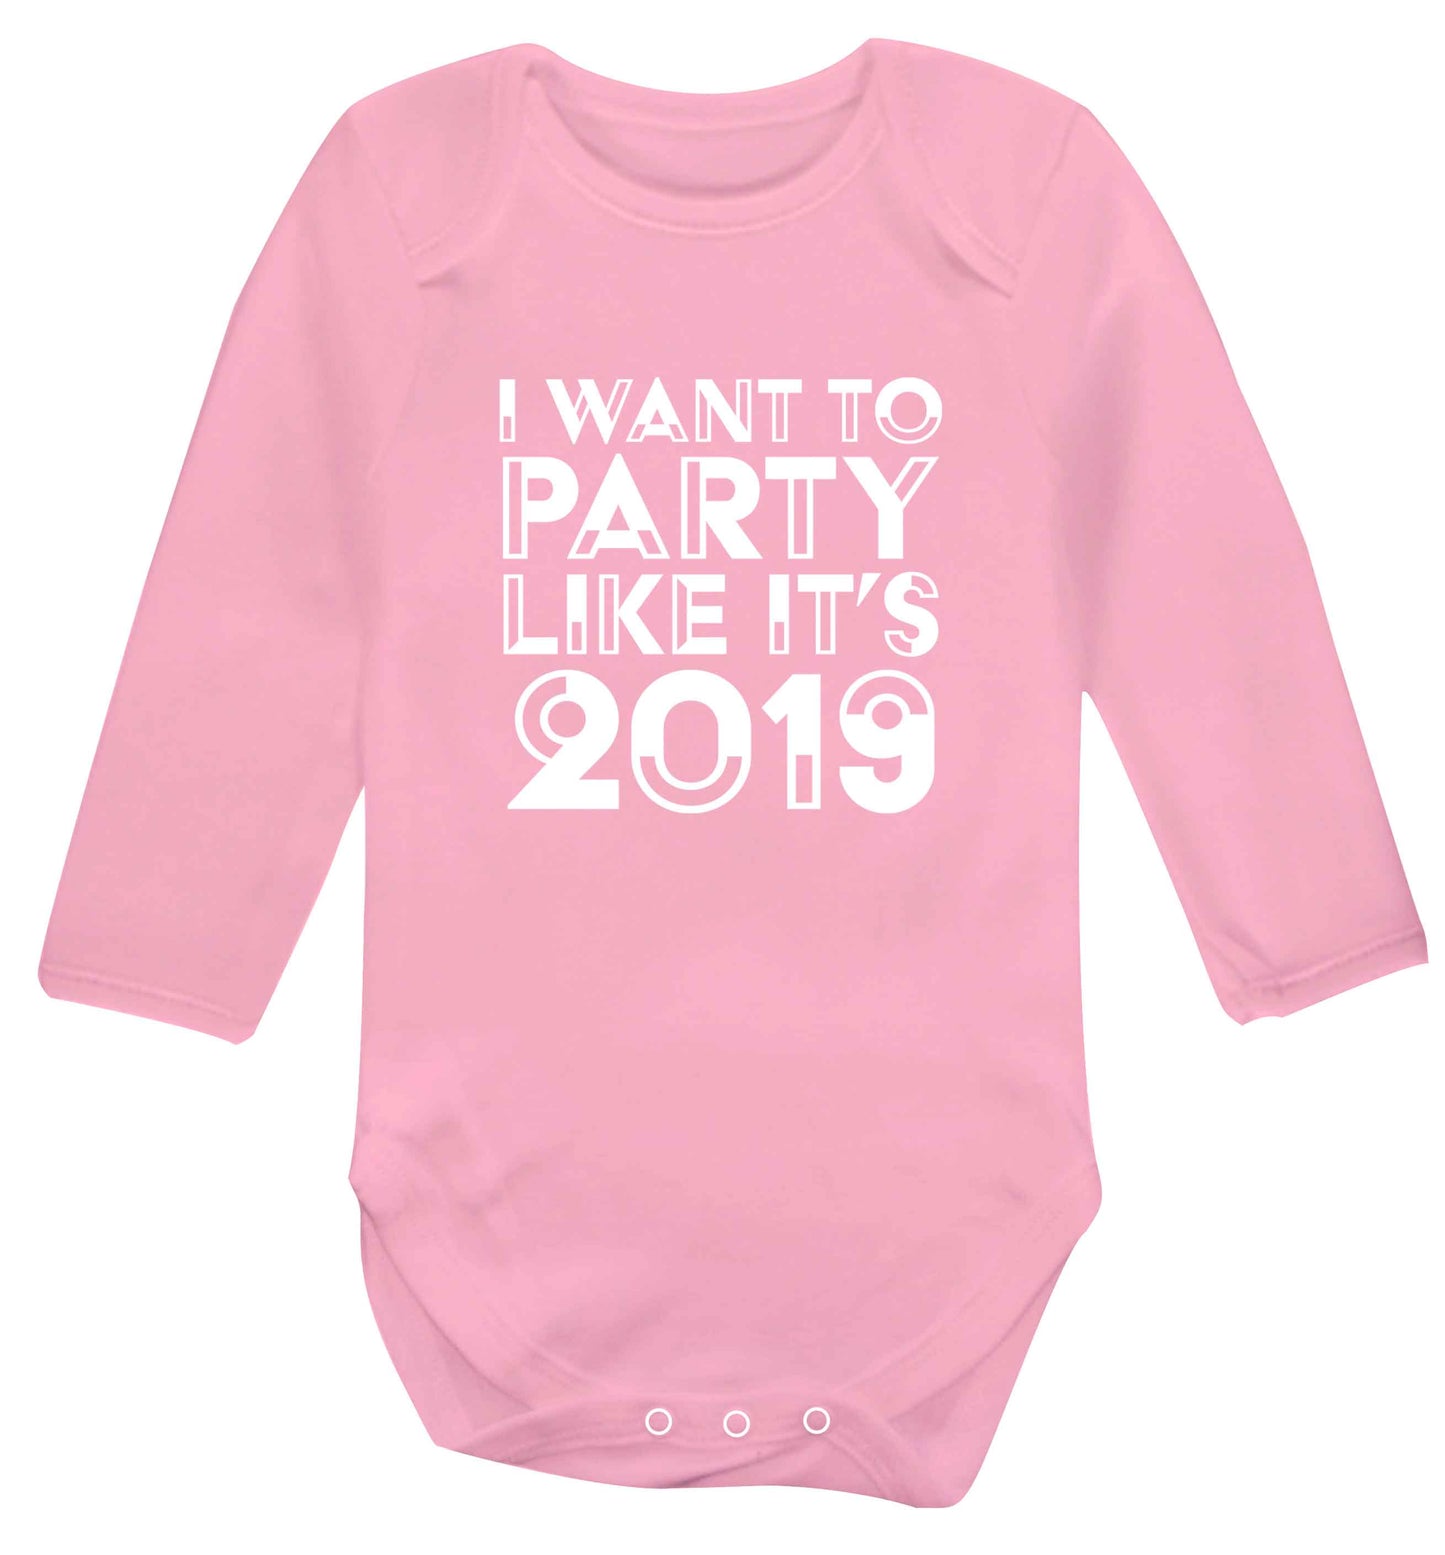 I want to party like it's 2019 baby vest long sleeved pale pink 6-12 months